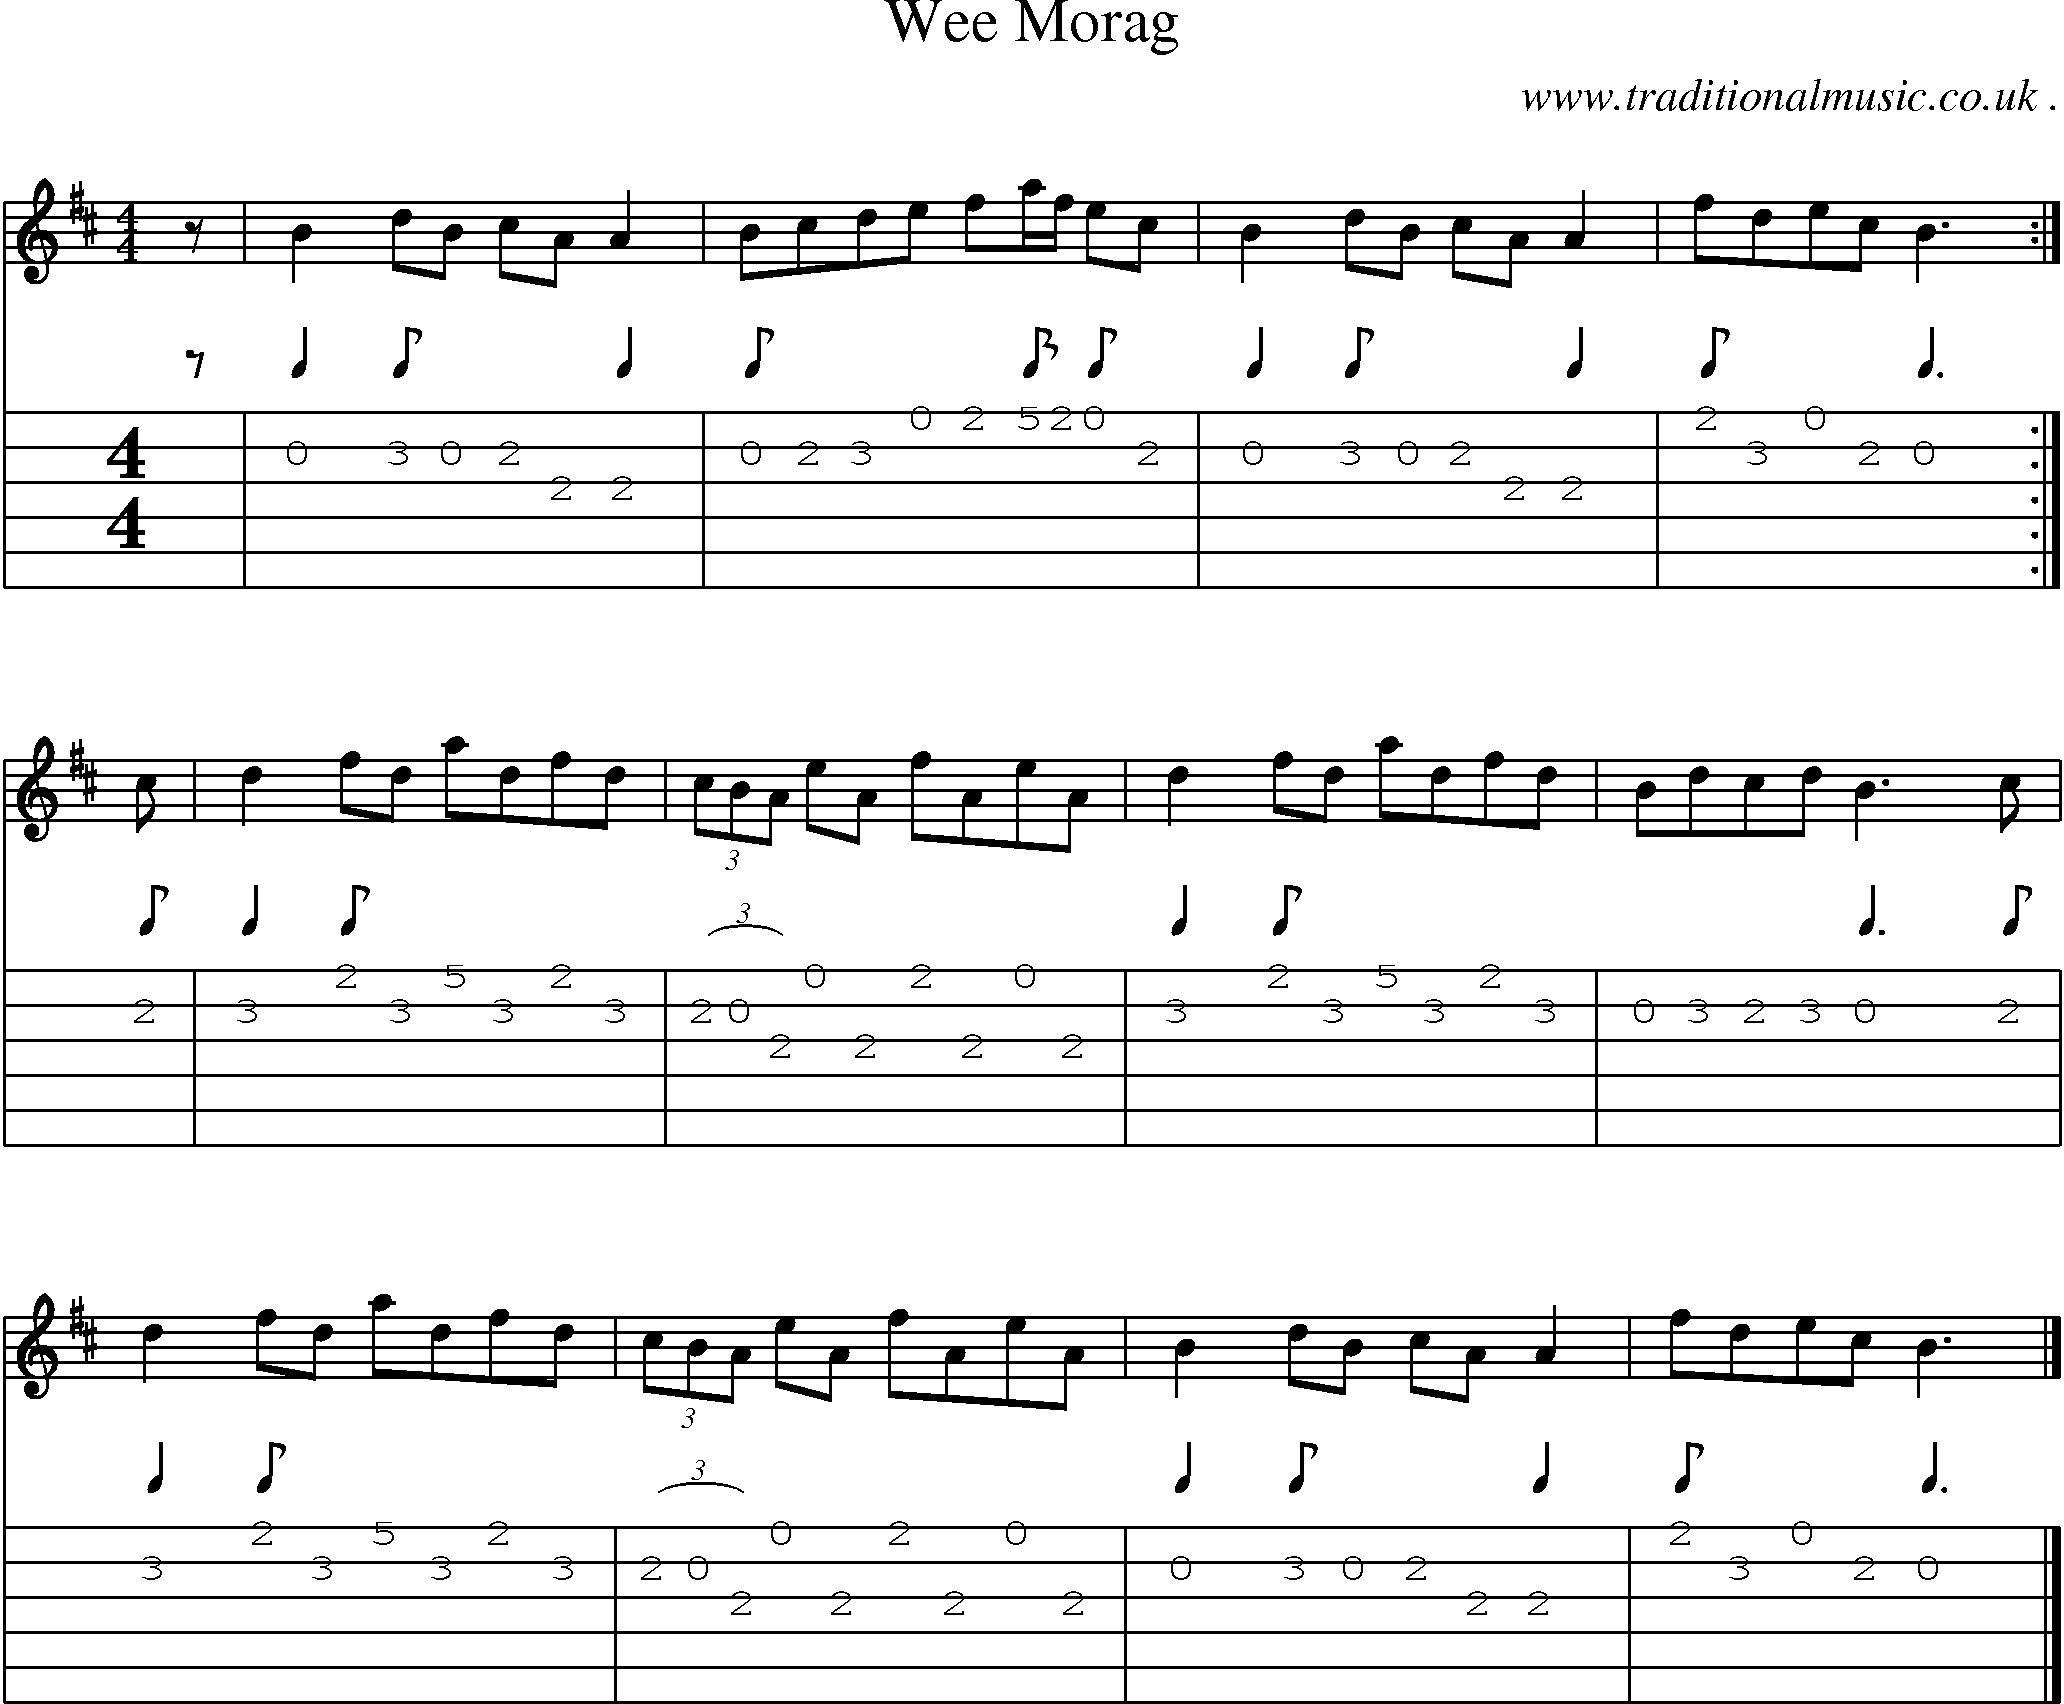 Sheet-music  score, Chords and Guitar Tabs for Wee Morag